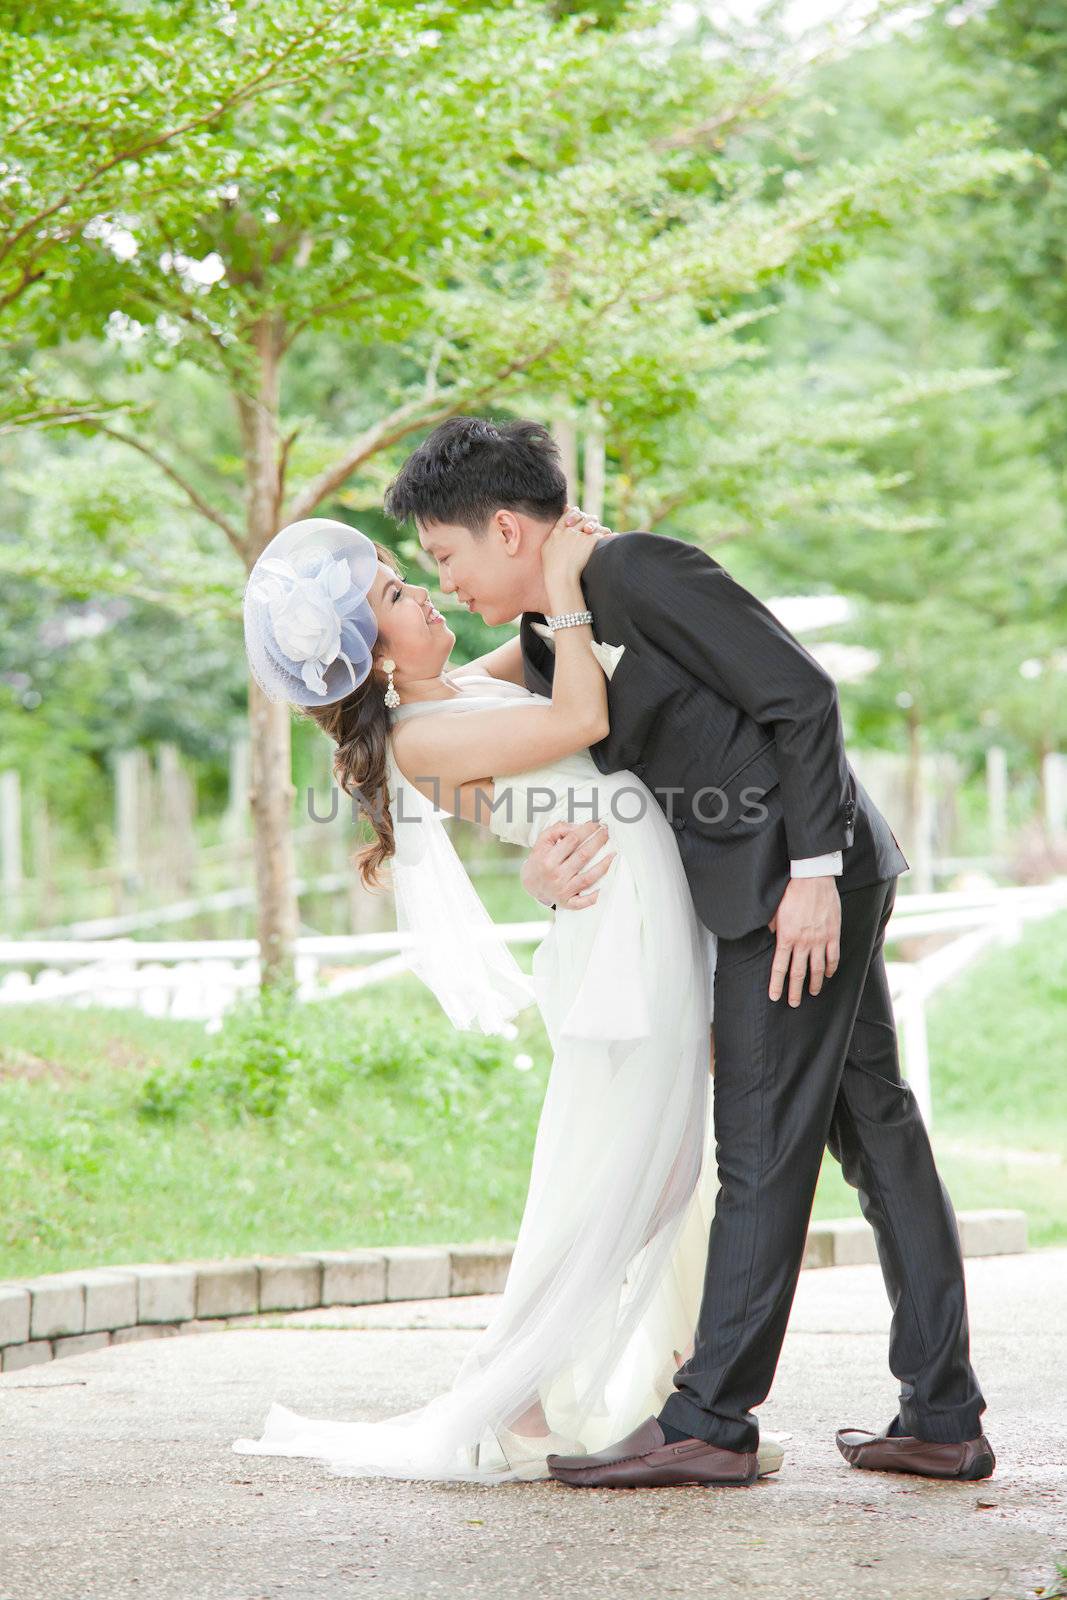 Portrait of Romantic Newlyweds Couples kissing for wedding background